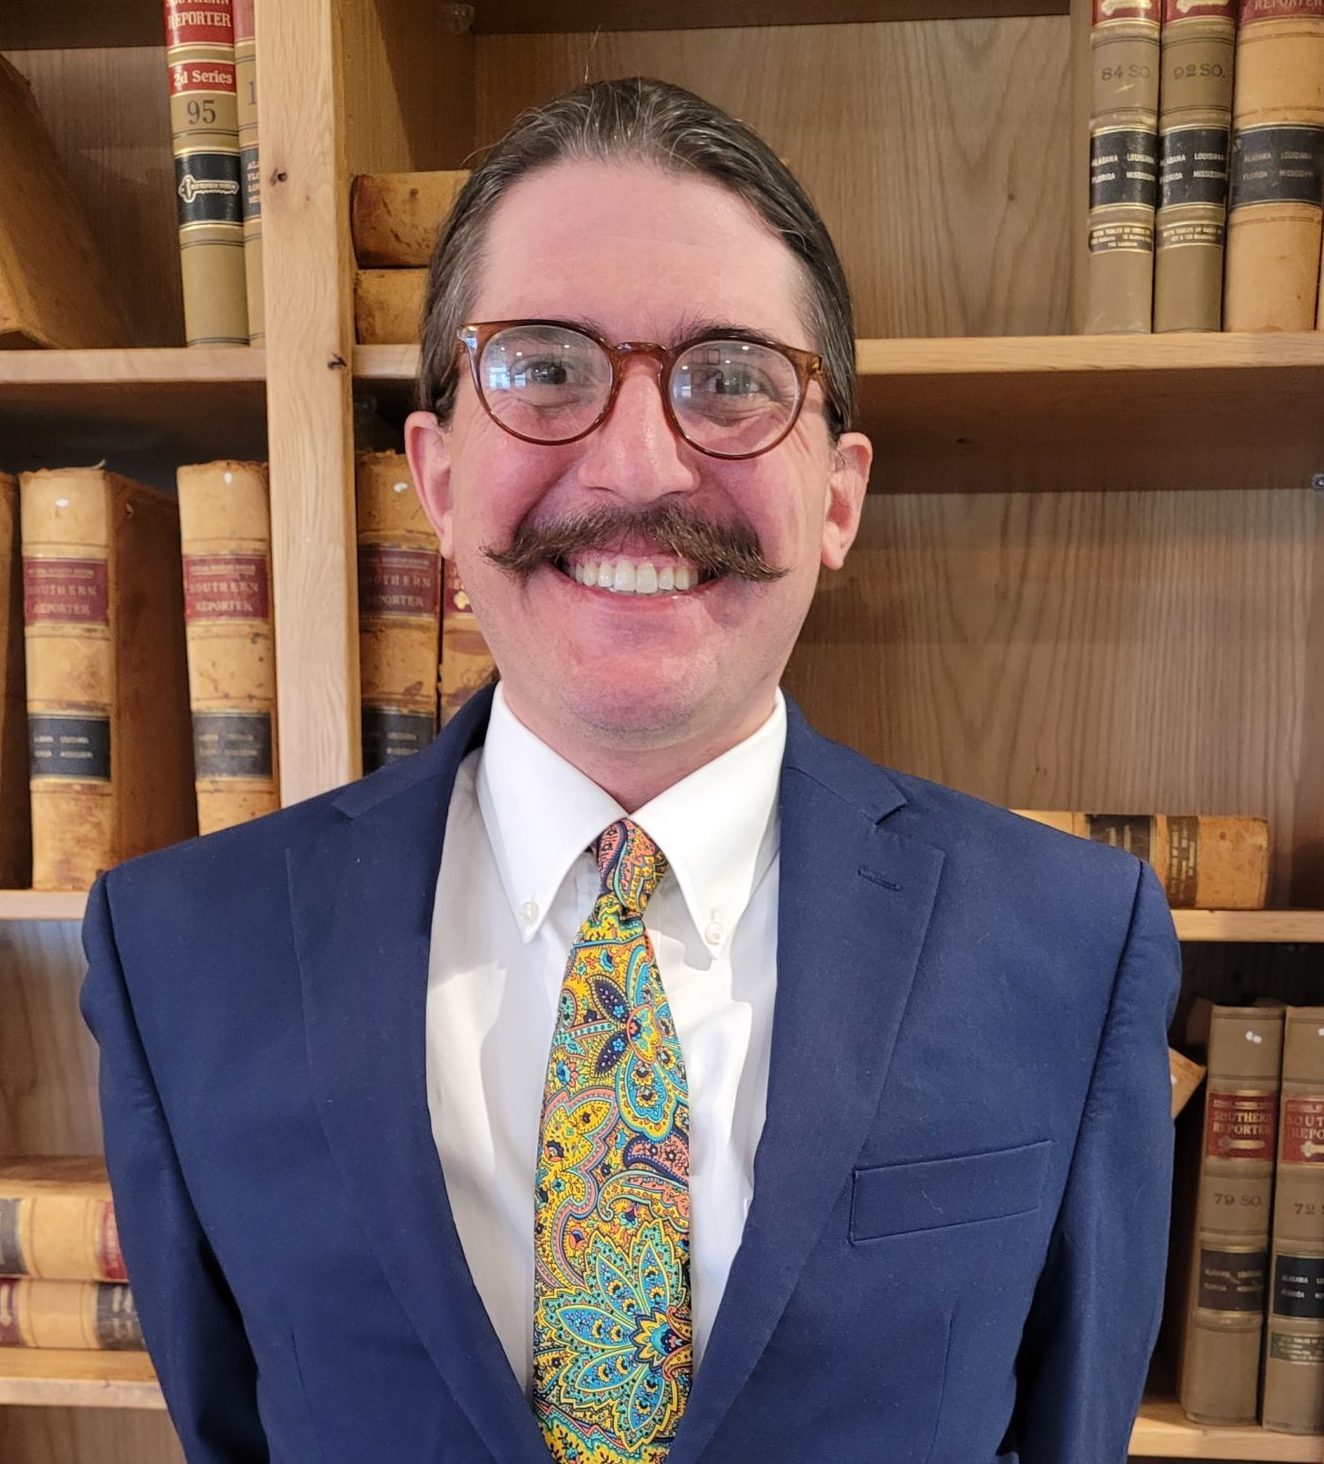 white man with mustache and glasses wearing suit, smiling standing against bookshelf